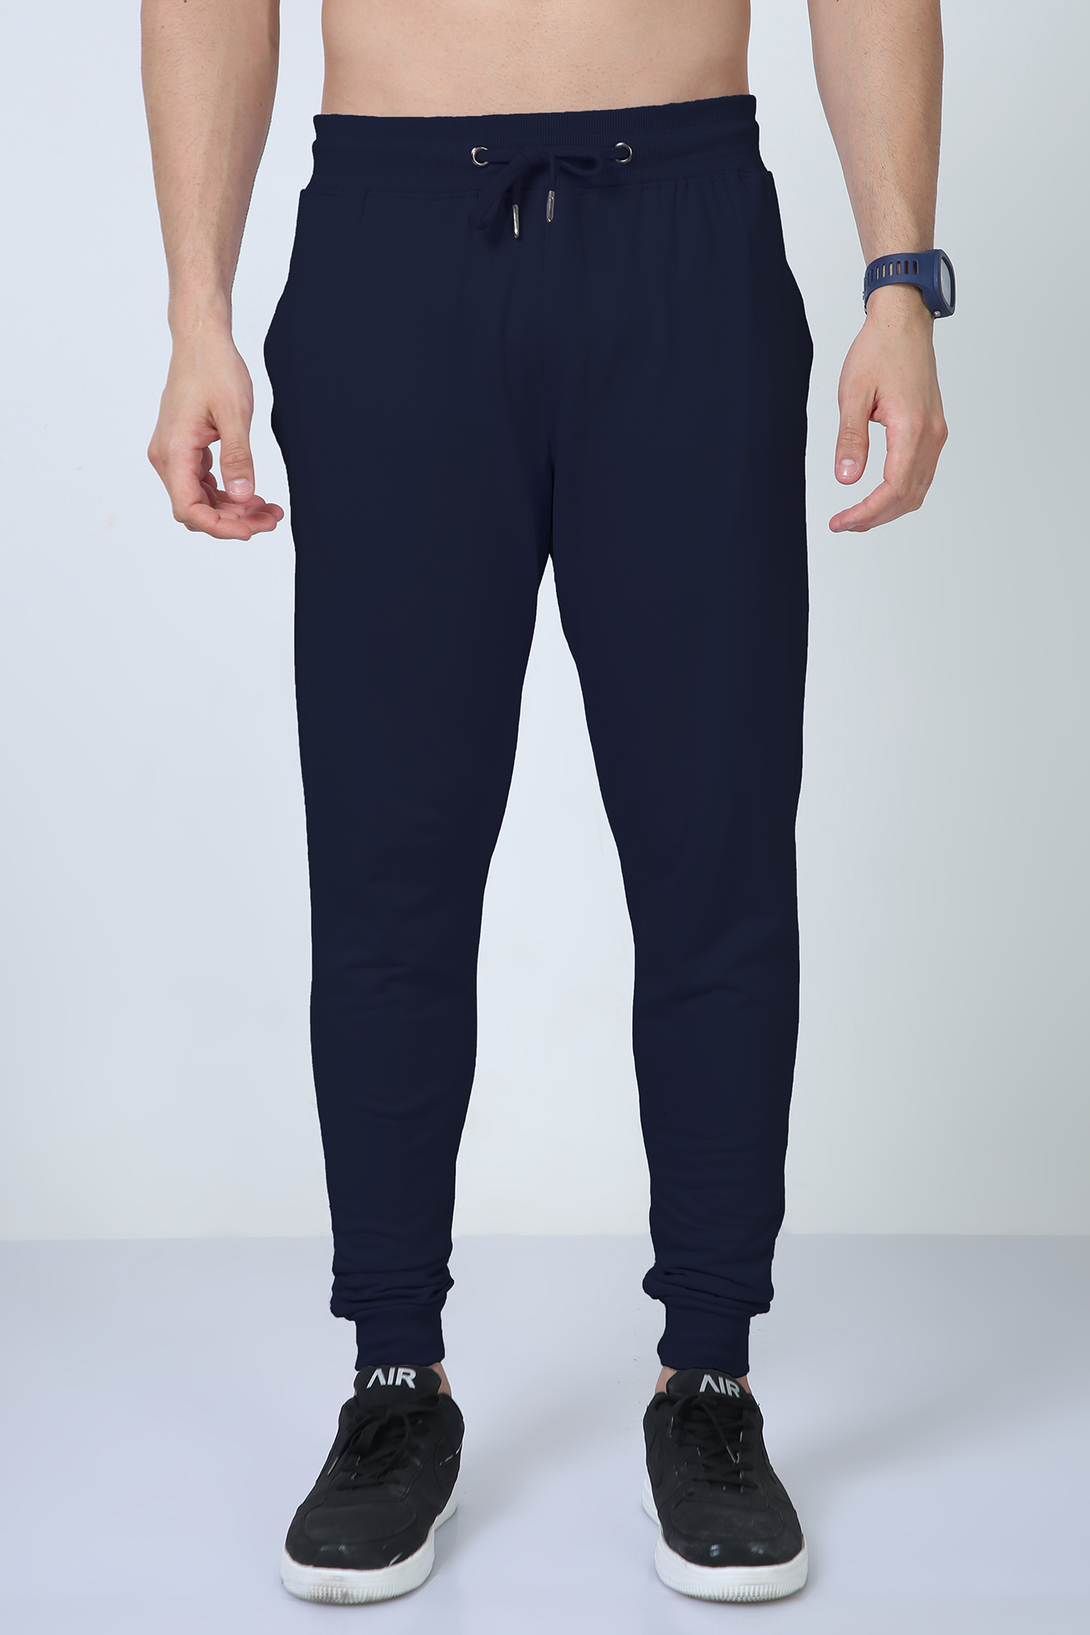 Joggers For Men - WowWaves - 2